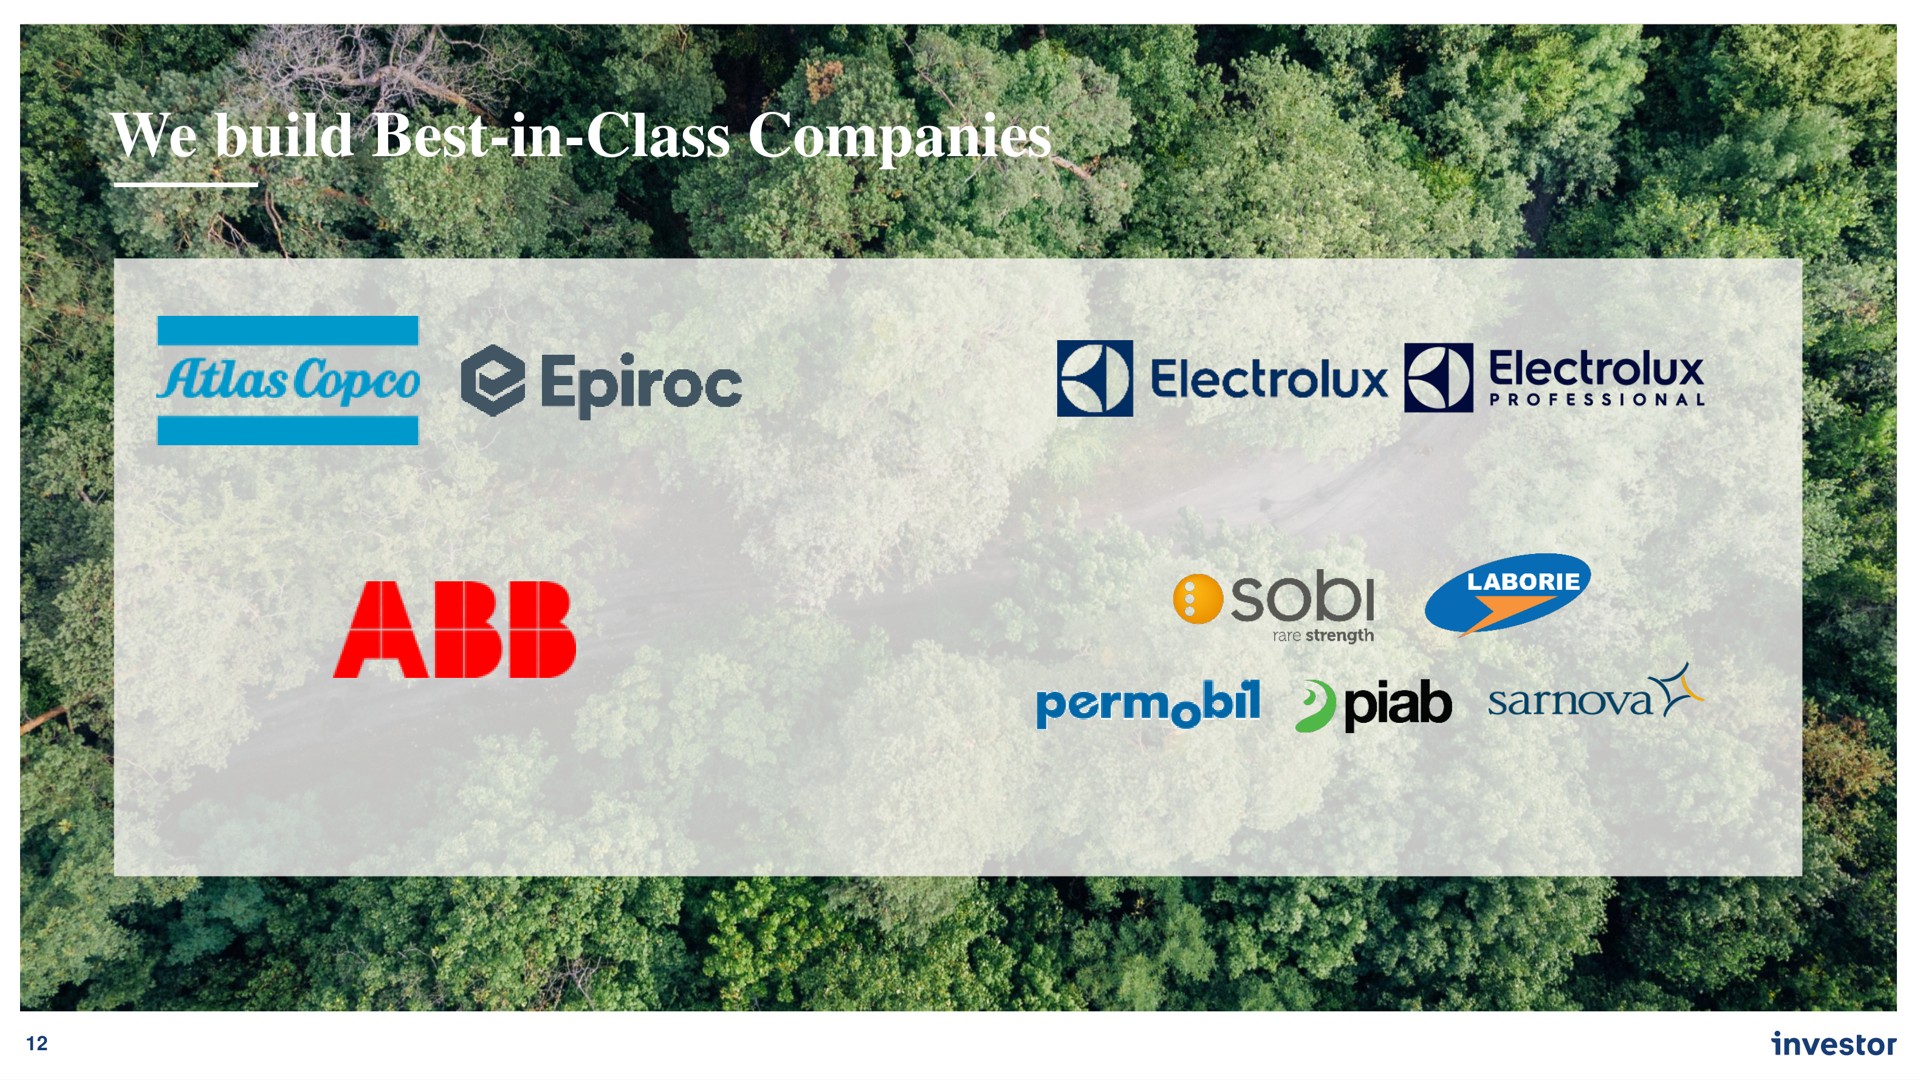 we build best in class companies | Investor AB